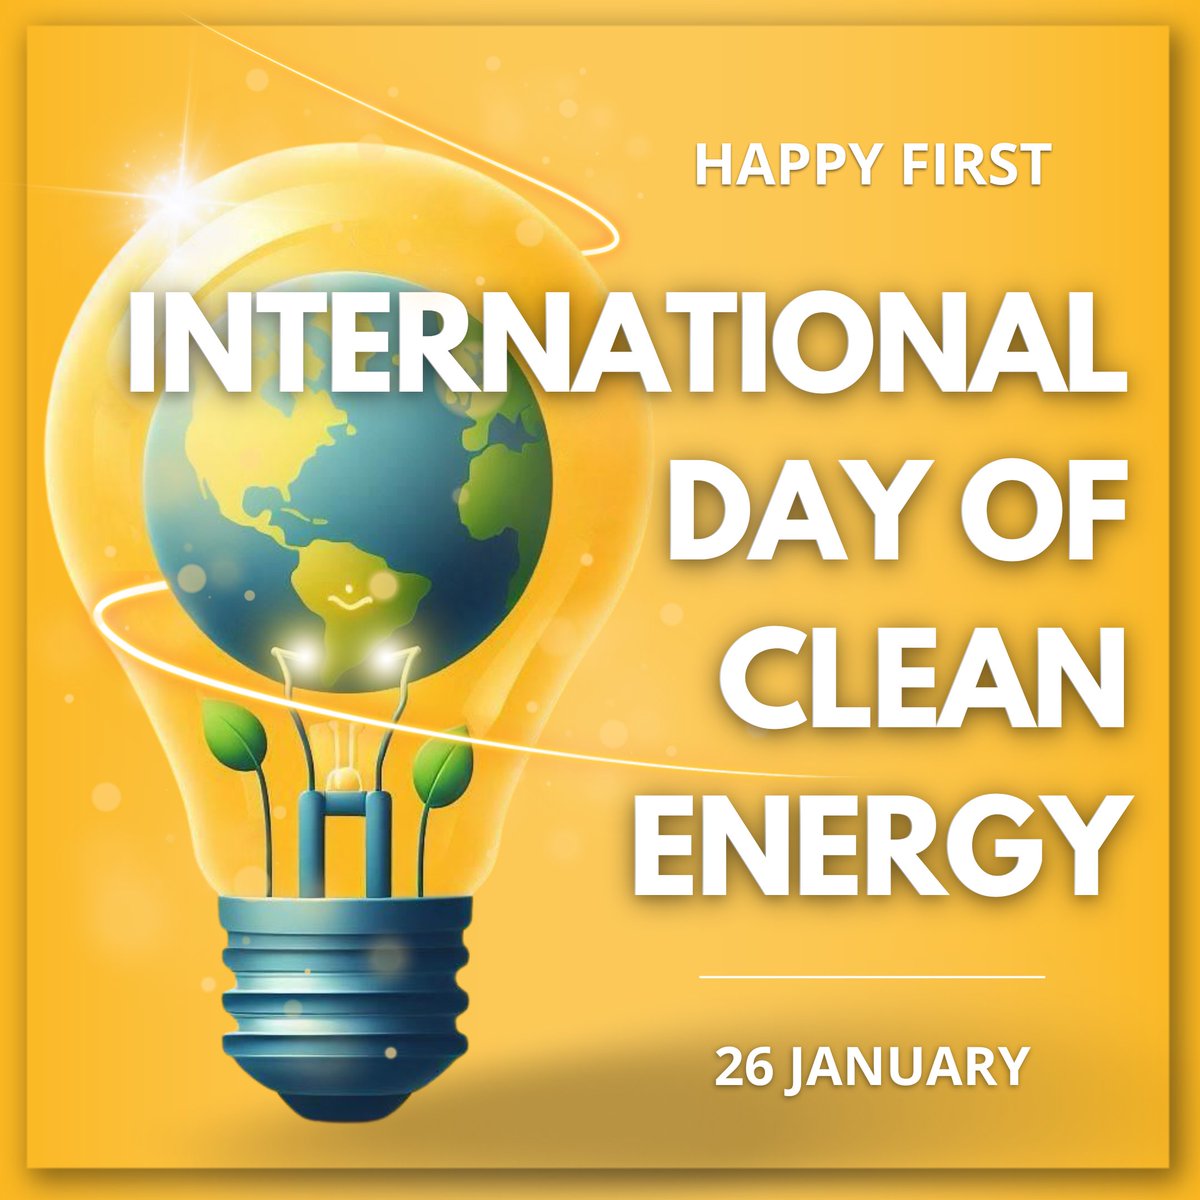 Happy first ever International #CleanEnergyDay! 

Share your eco-friendly initiatives and inspire others to join the UN’s global movement towards a cleaner, greener planet. 💚🌍 #EnergyforAll